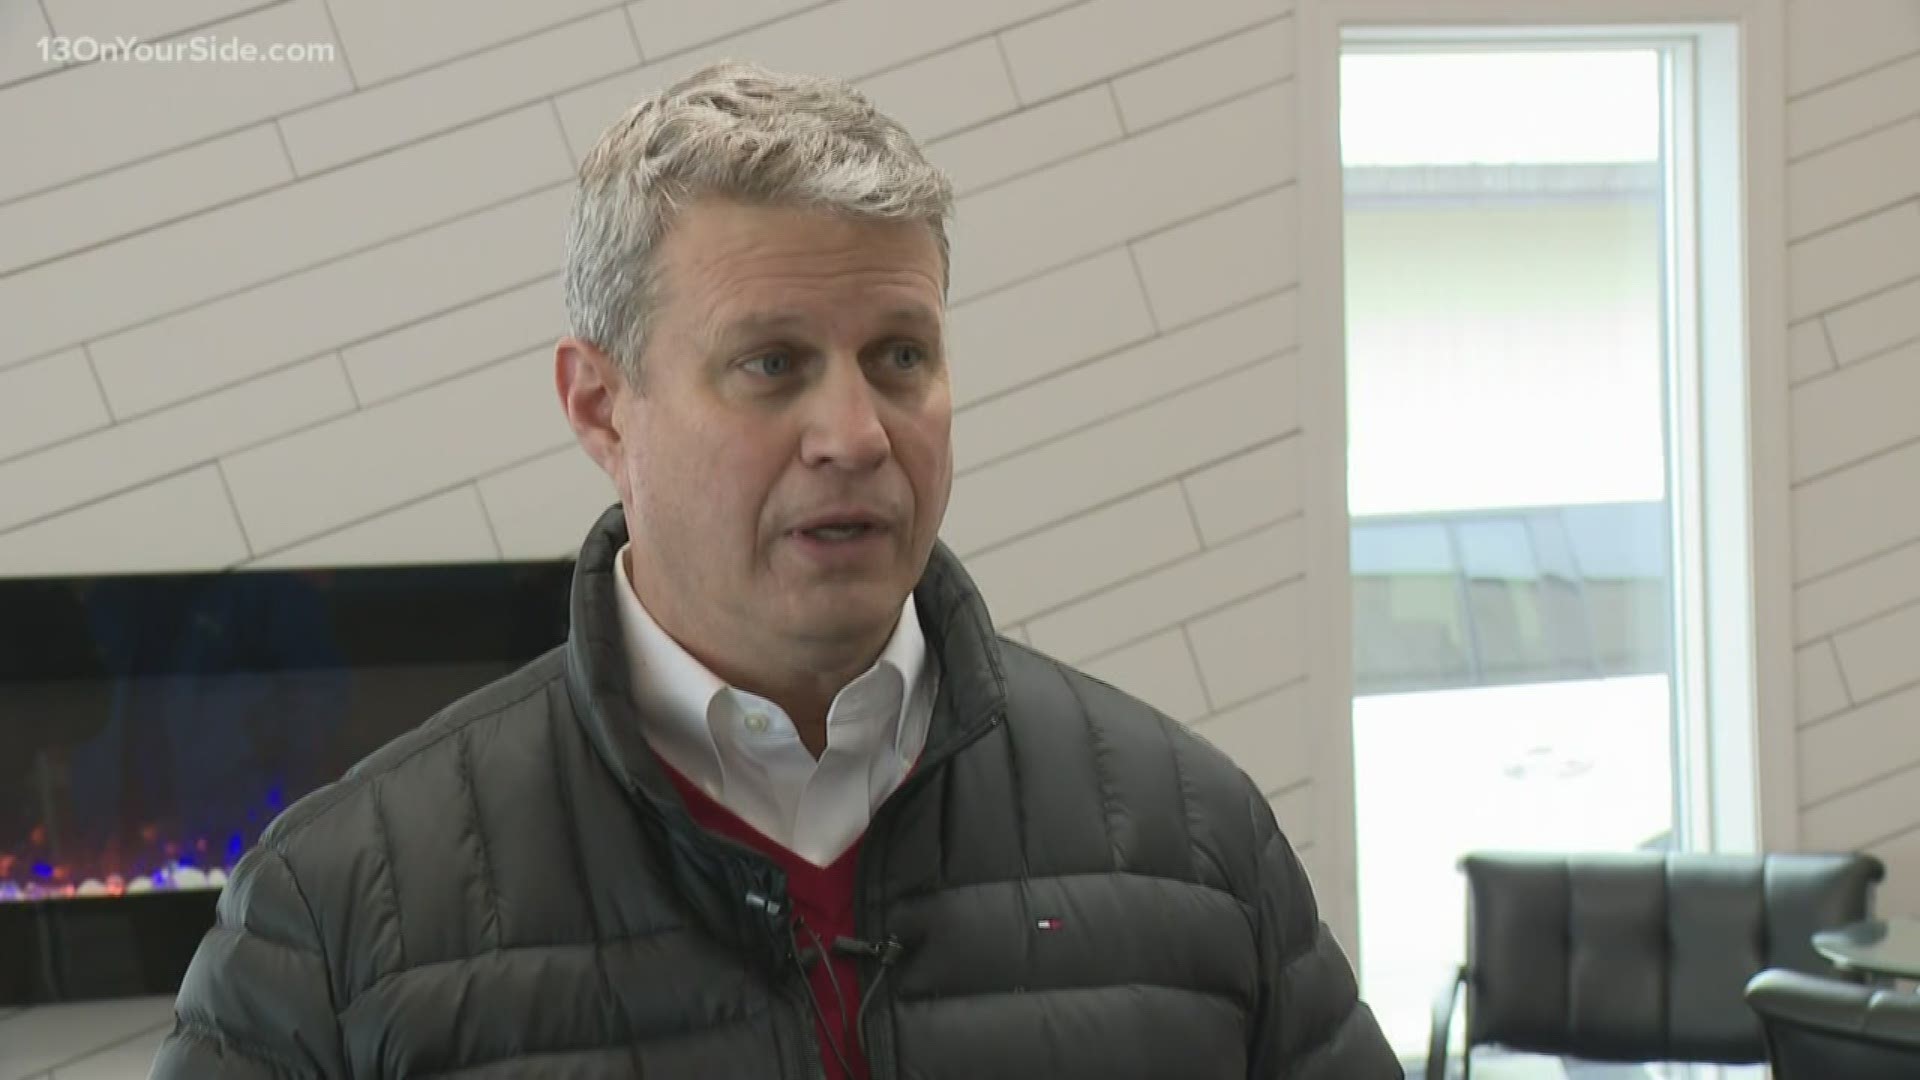 Friday's shoreline flight gave U.S. Rep. Bill Huizenga, R-Zeeland, a close look at damage from erosion and infrastructure threatened by high water.